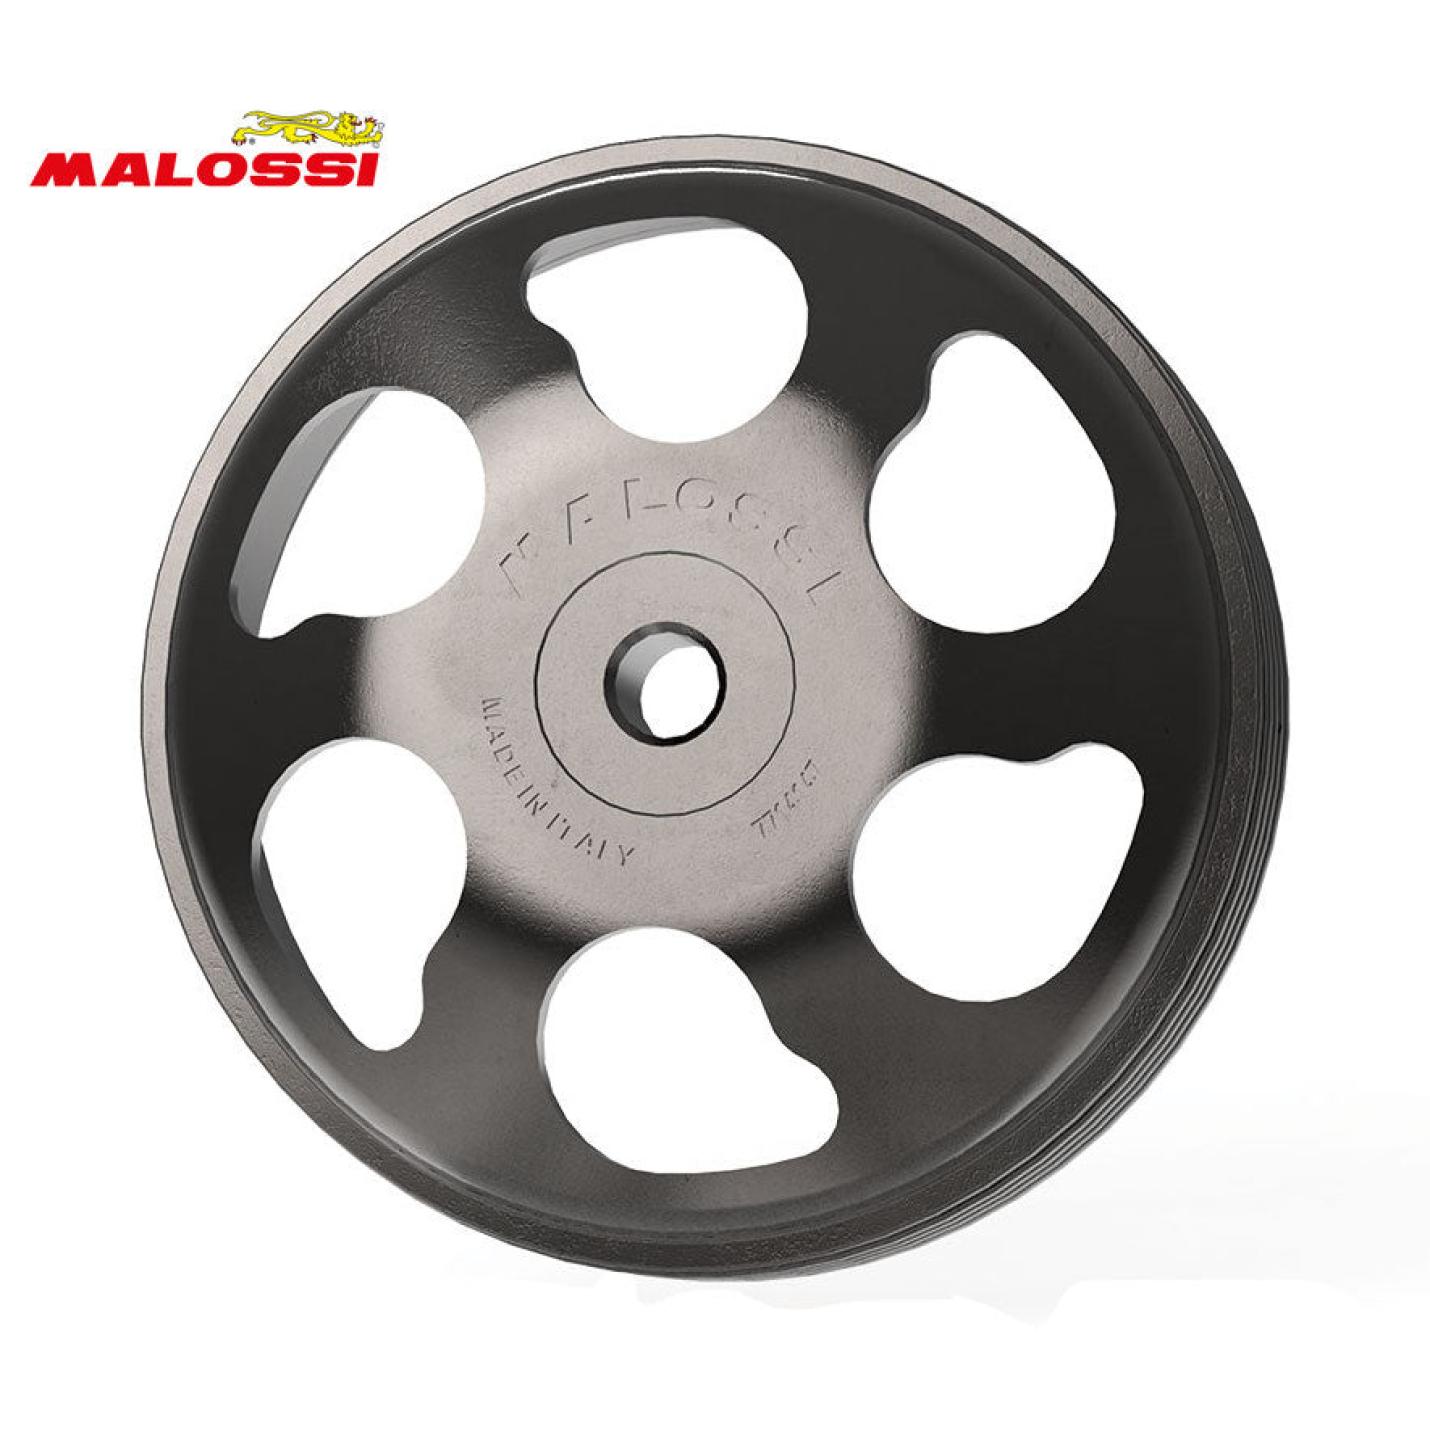 Koppelingshuis Malossi MHR Wing Clutch 107mm | Peugeot / Piaggio / Kymco AE-trading